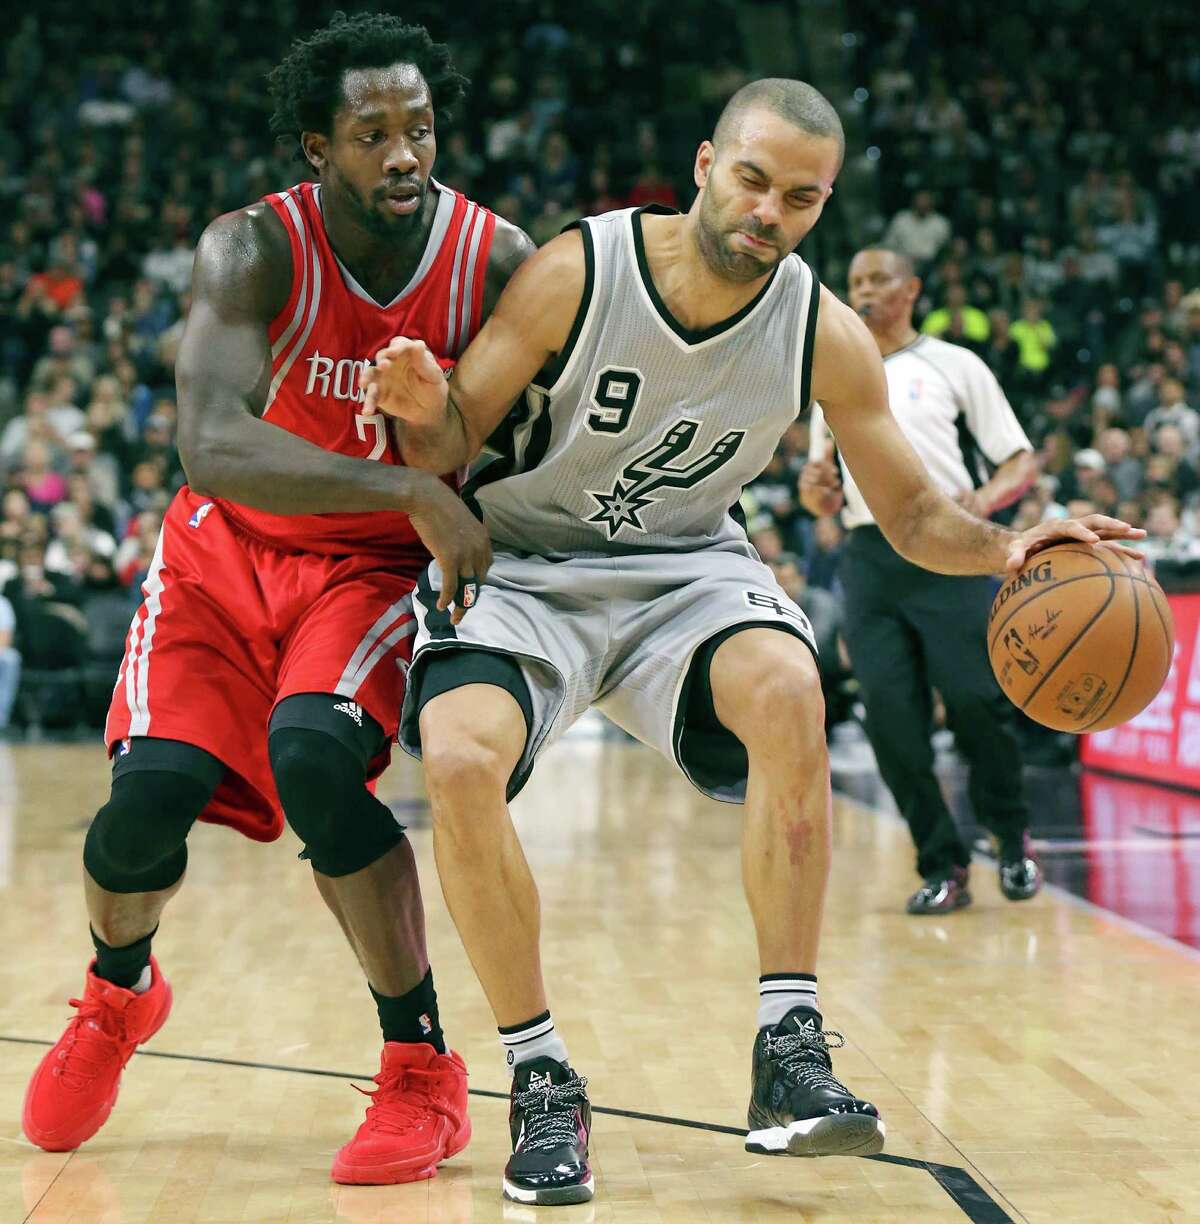 Spurs’ Tony Parker looks for room around Houston Rockets’ Patrick Beverley during second half action on Jan. 2, 2016 at the AT&T Center.